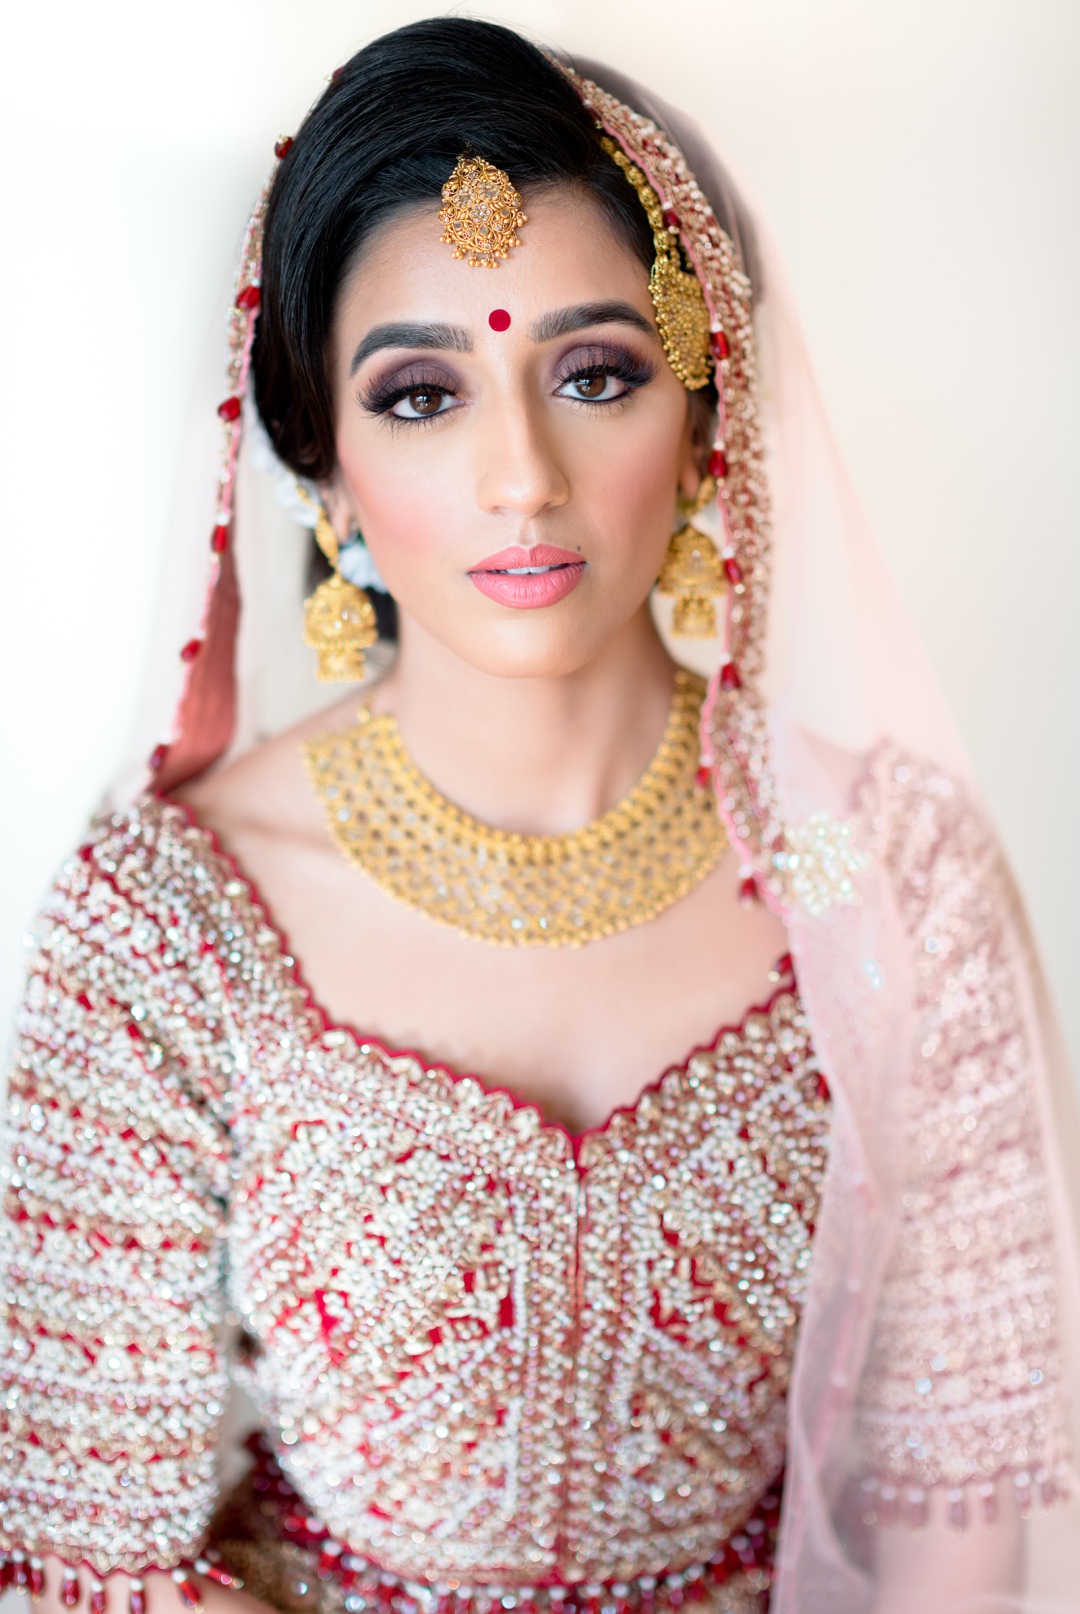 Stunning Sikh bride with makeup by Patti Panue